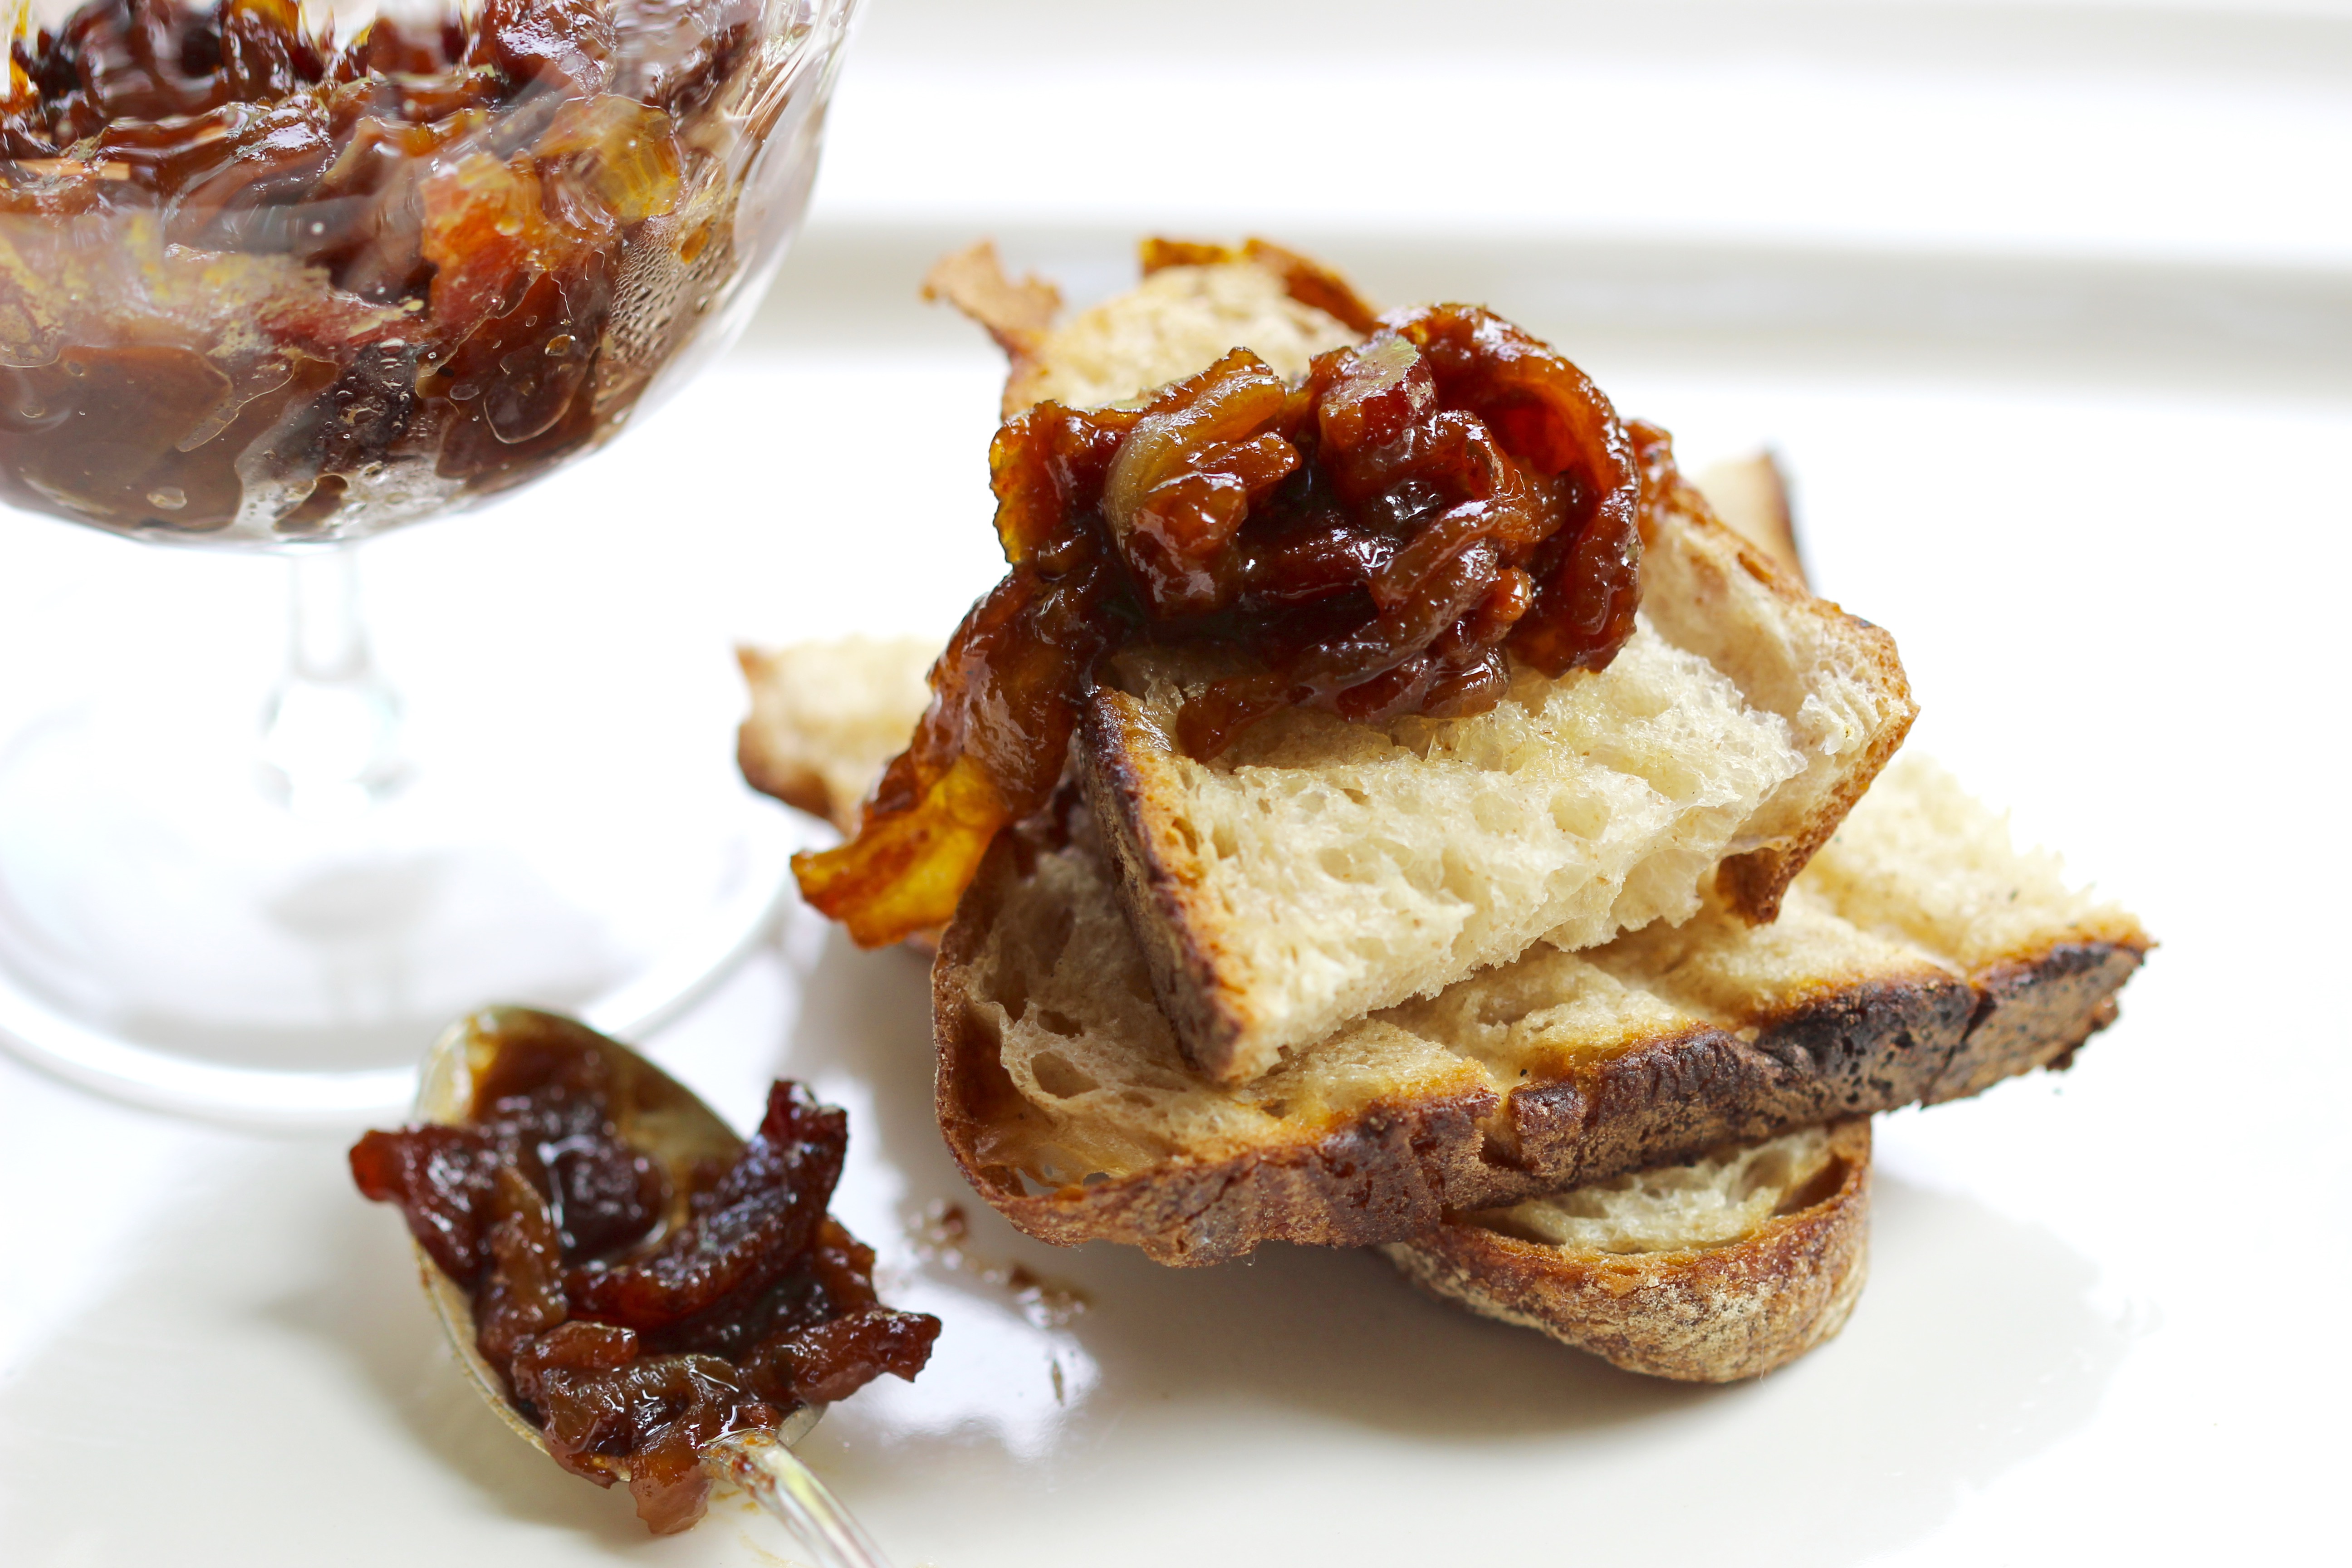 Featured image for “Bacon-Onion Jam”